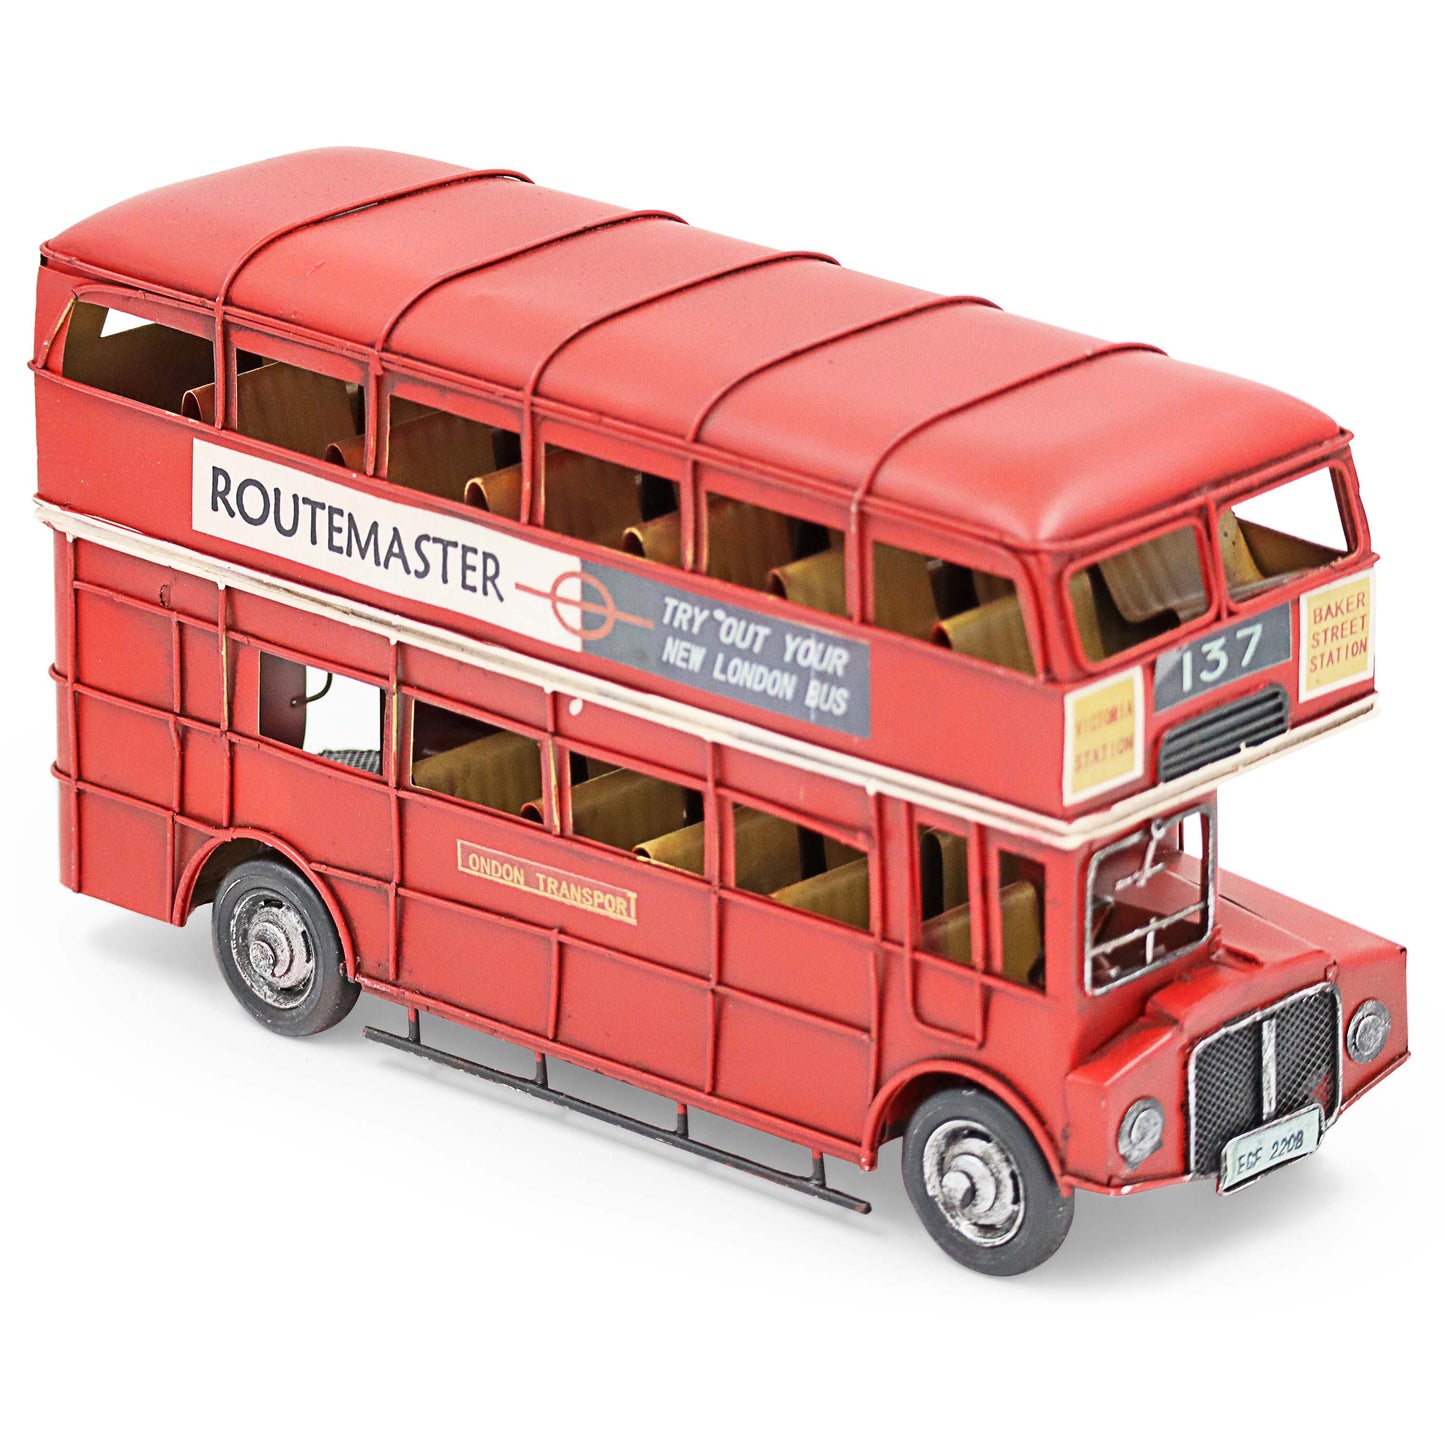 London red bus tin ornament